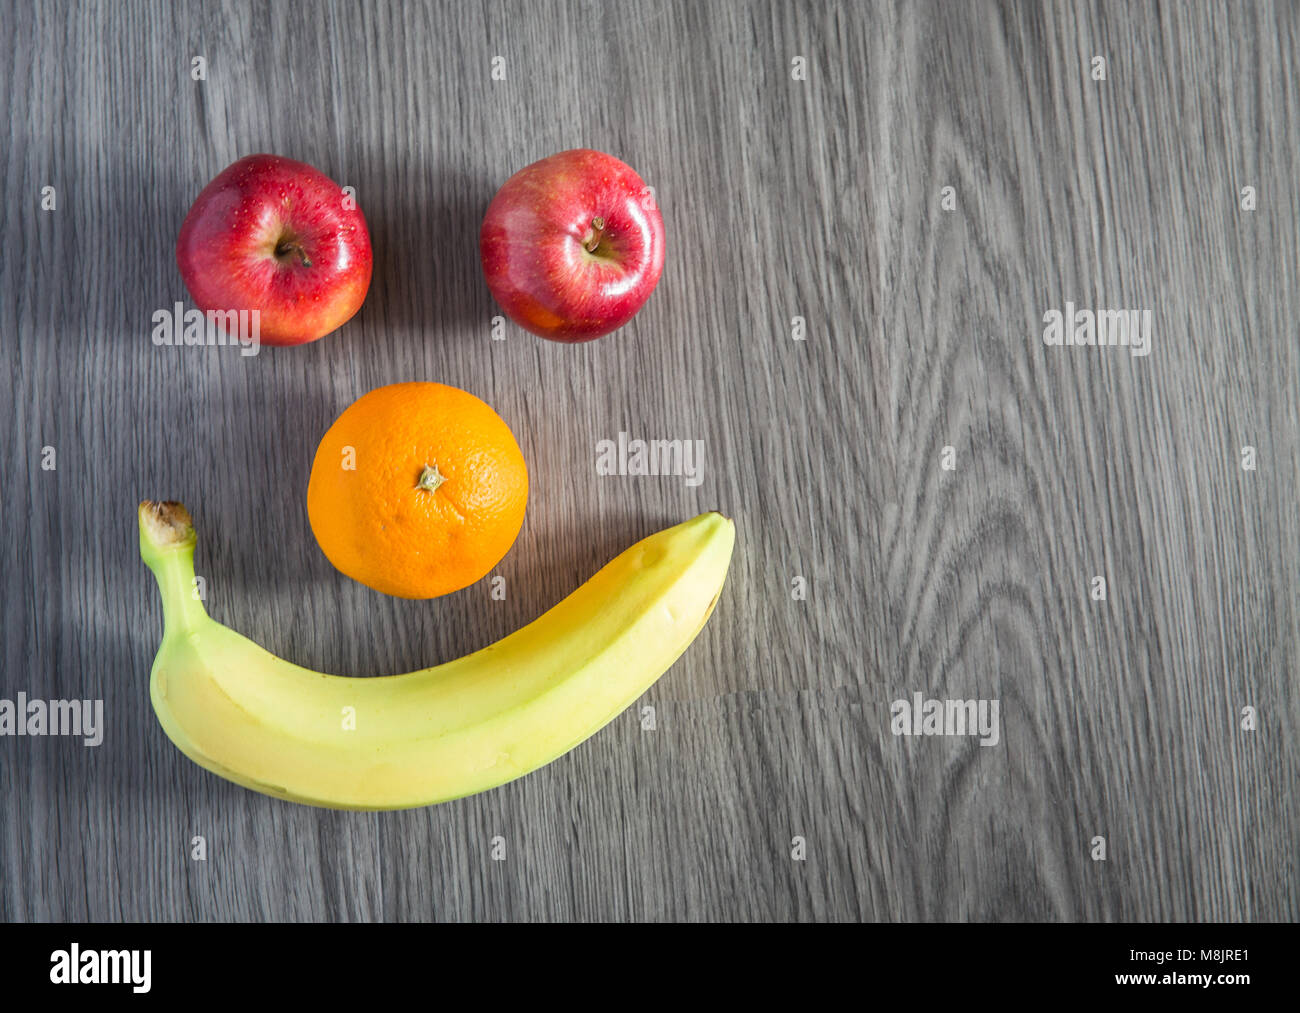 Different kinds of fruit including apples, oranges and bananas arranged into a smiling face to encourage children to eat healthily. Stock Photo